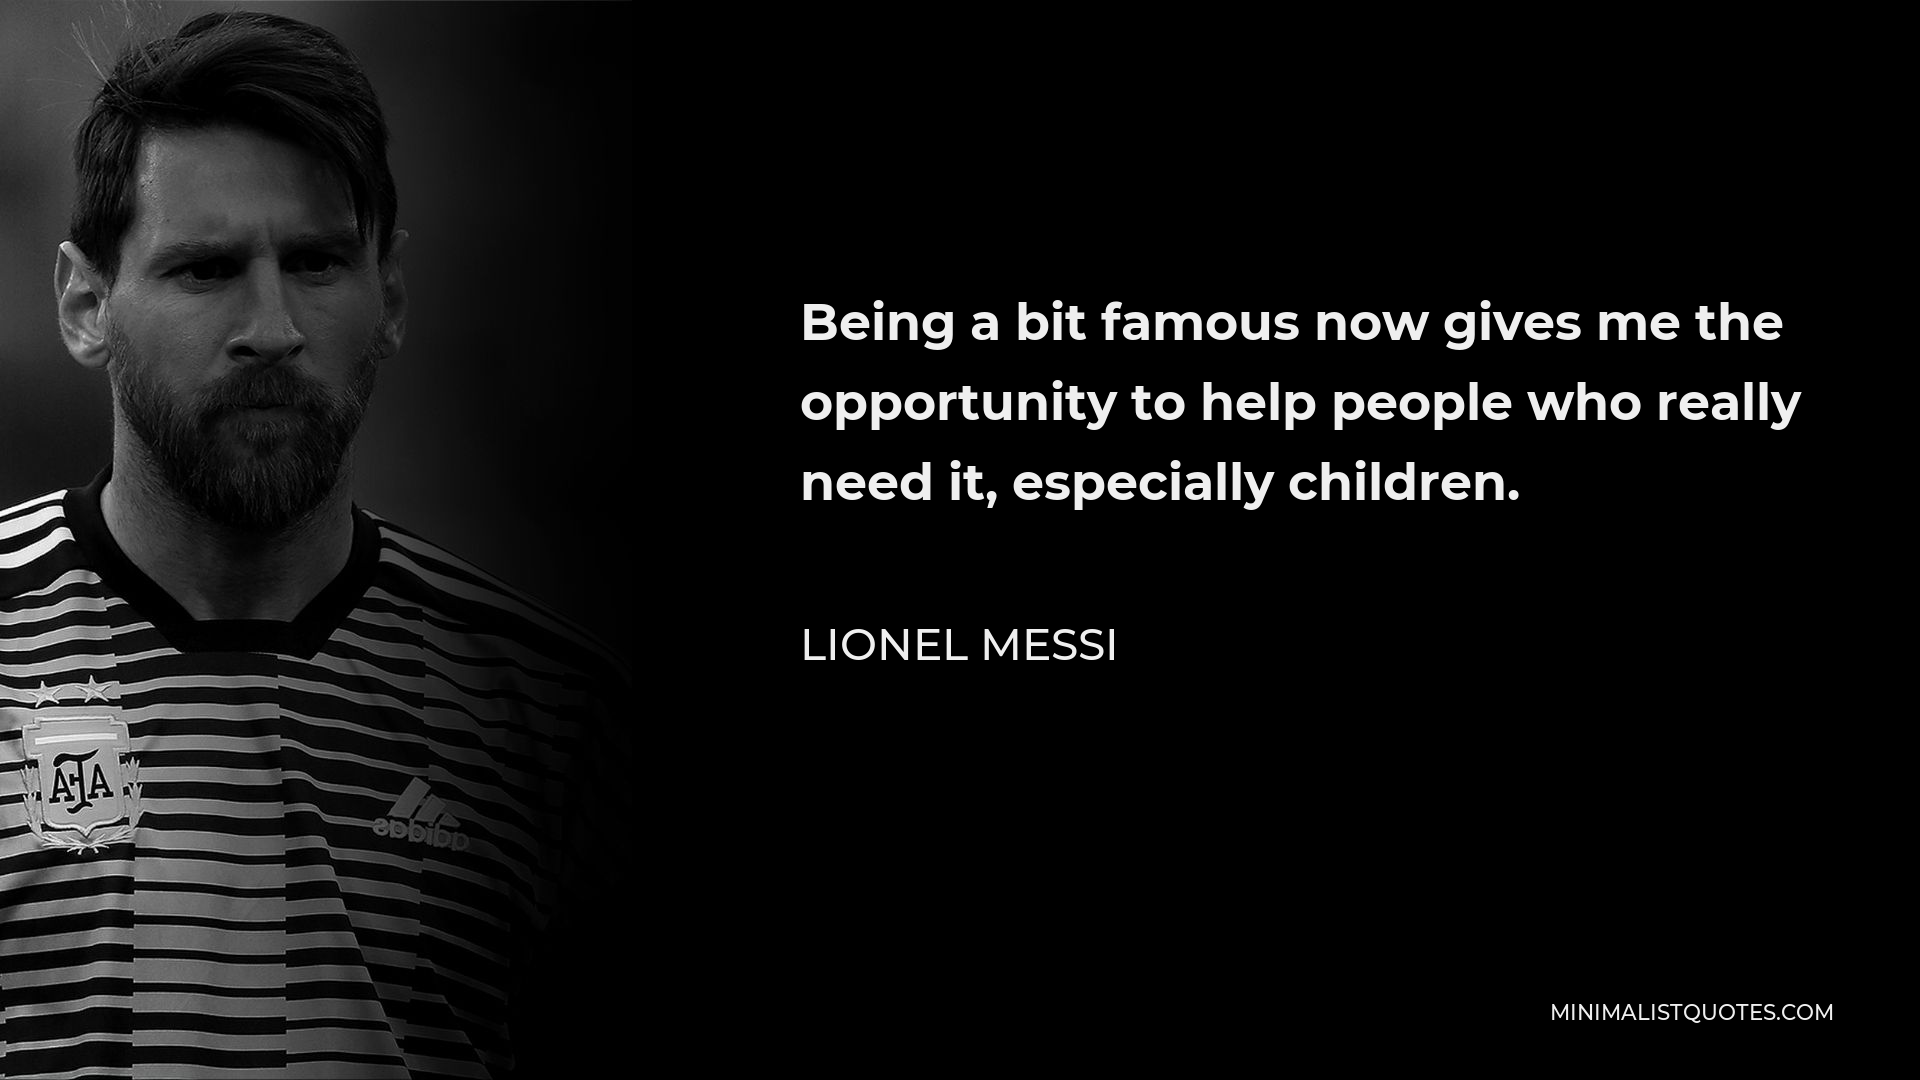 Lionel Messi Quote - Being a bit famous now gives me the opportunity to help people who really need it, especially children.